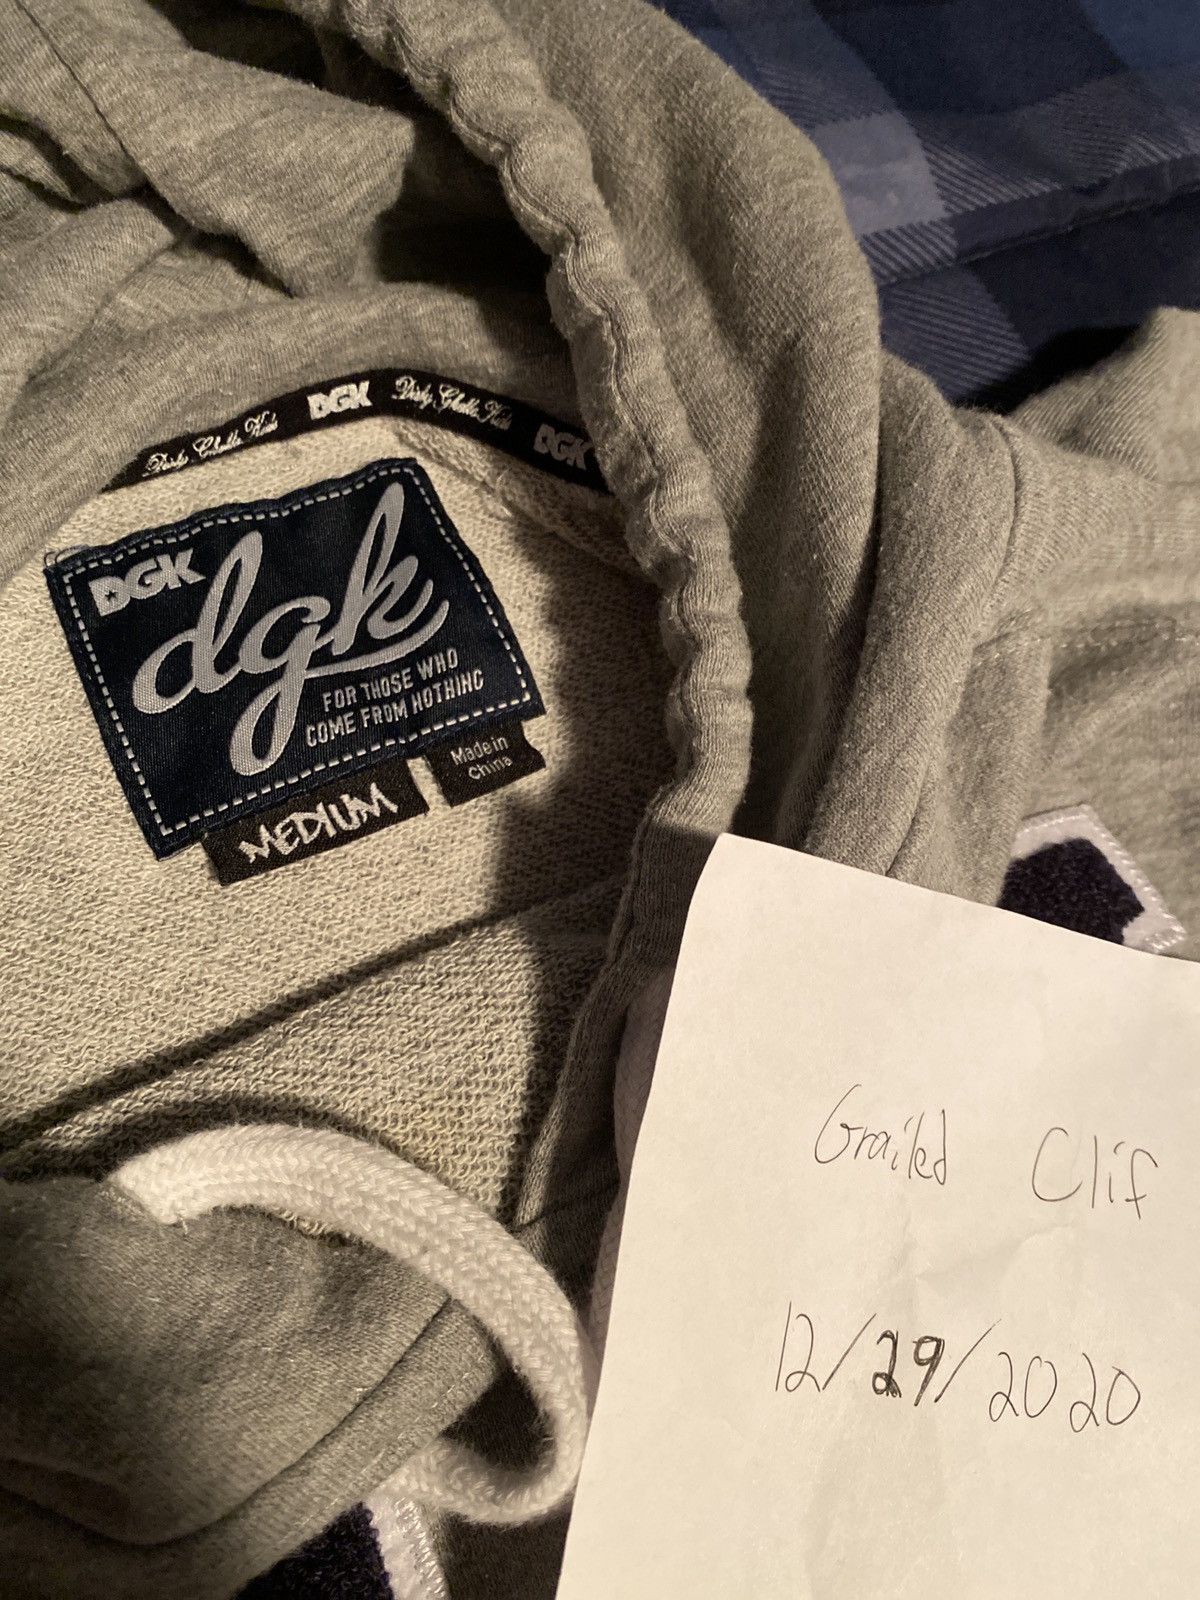 Dgk DGK Hoodie for those who come from nothing Size US M / EU 48-50 / 2 - 6 Thumbnail